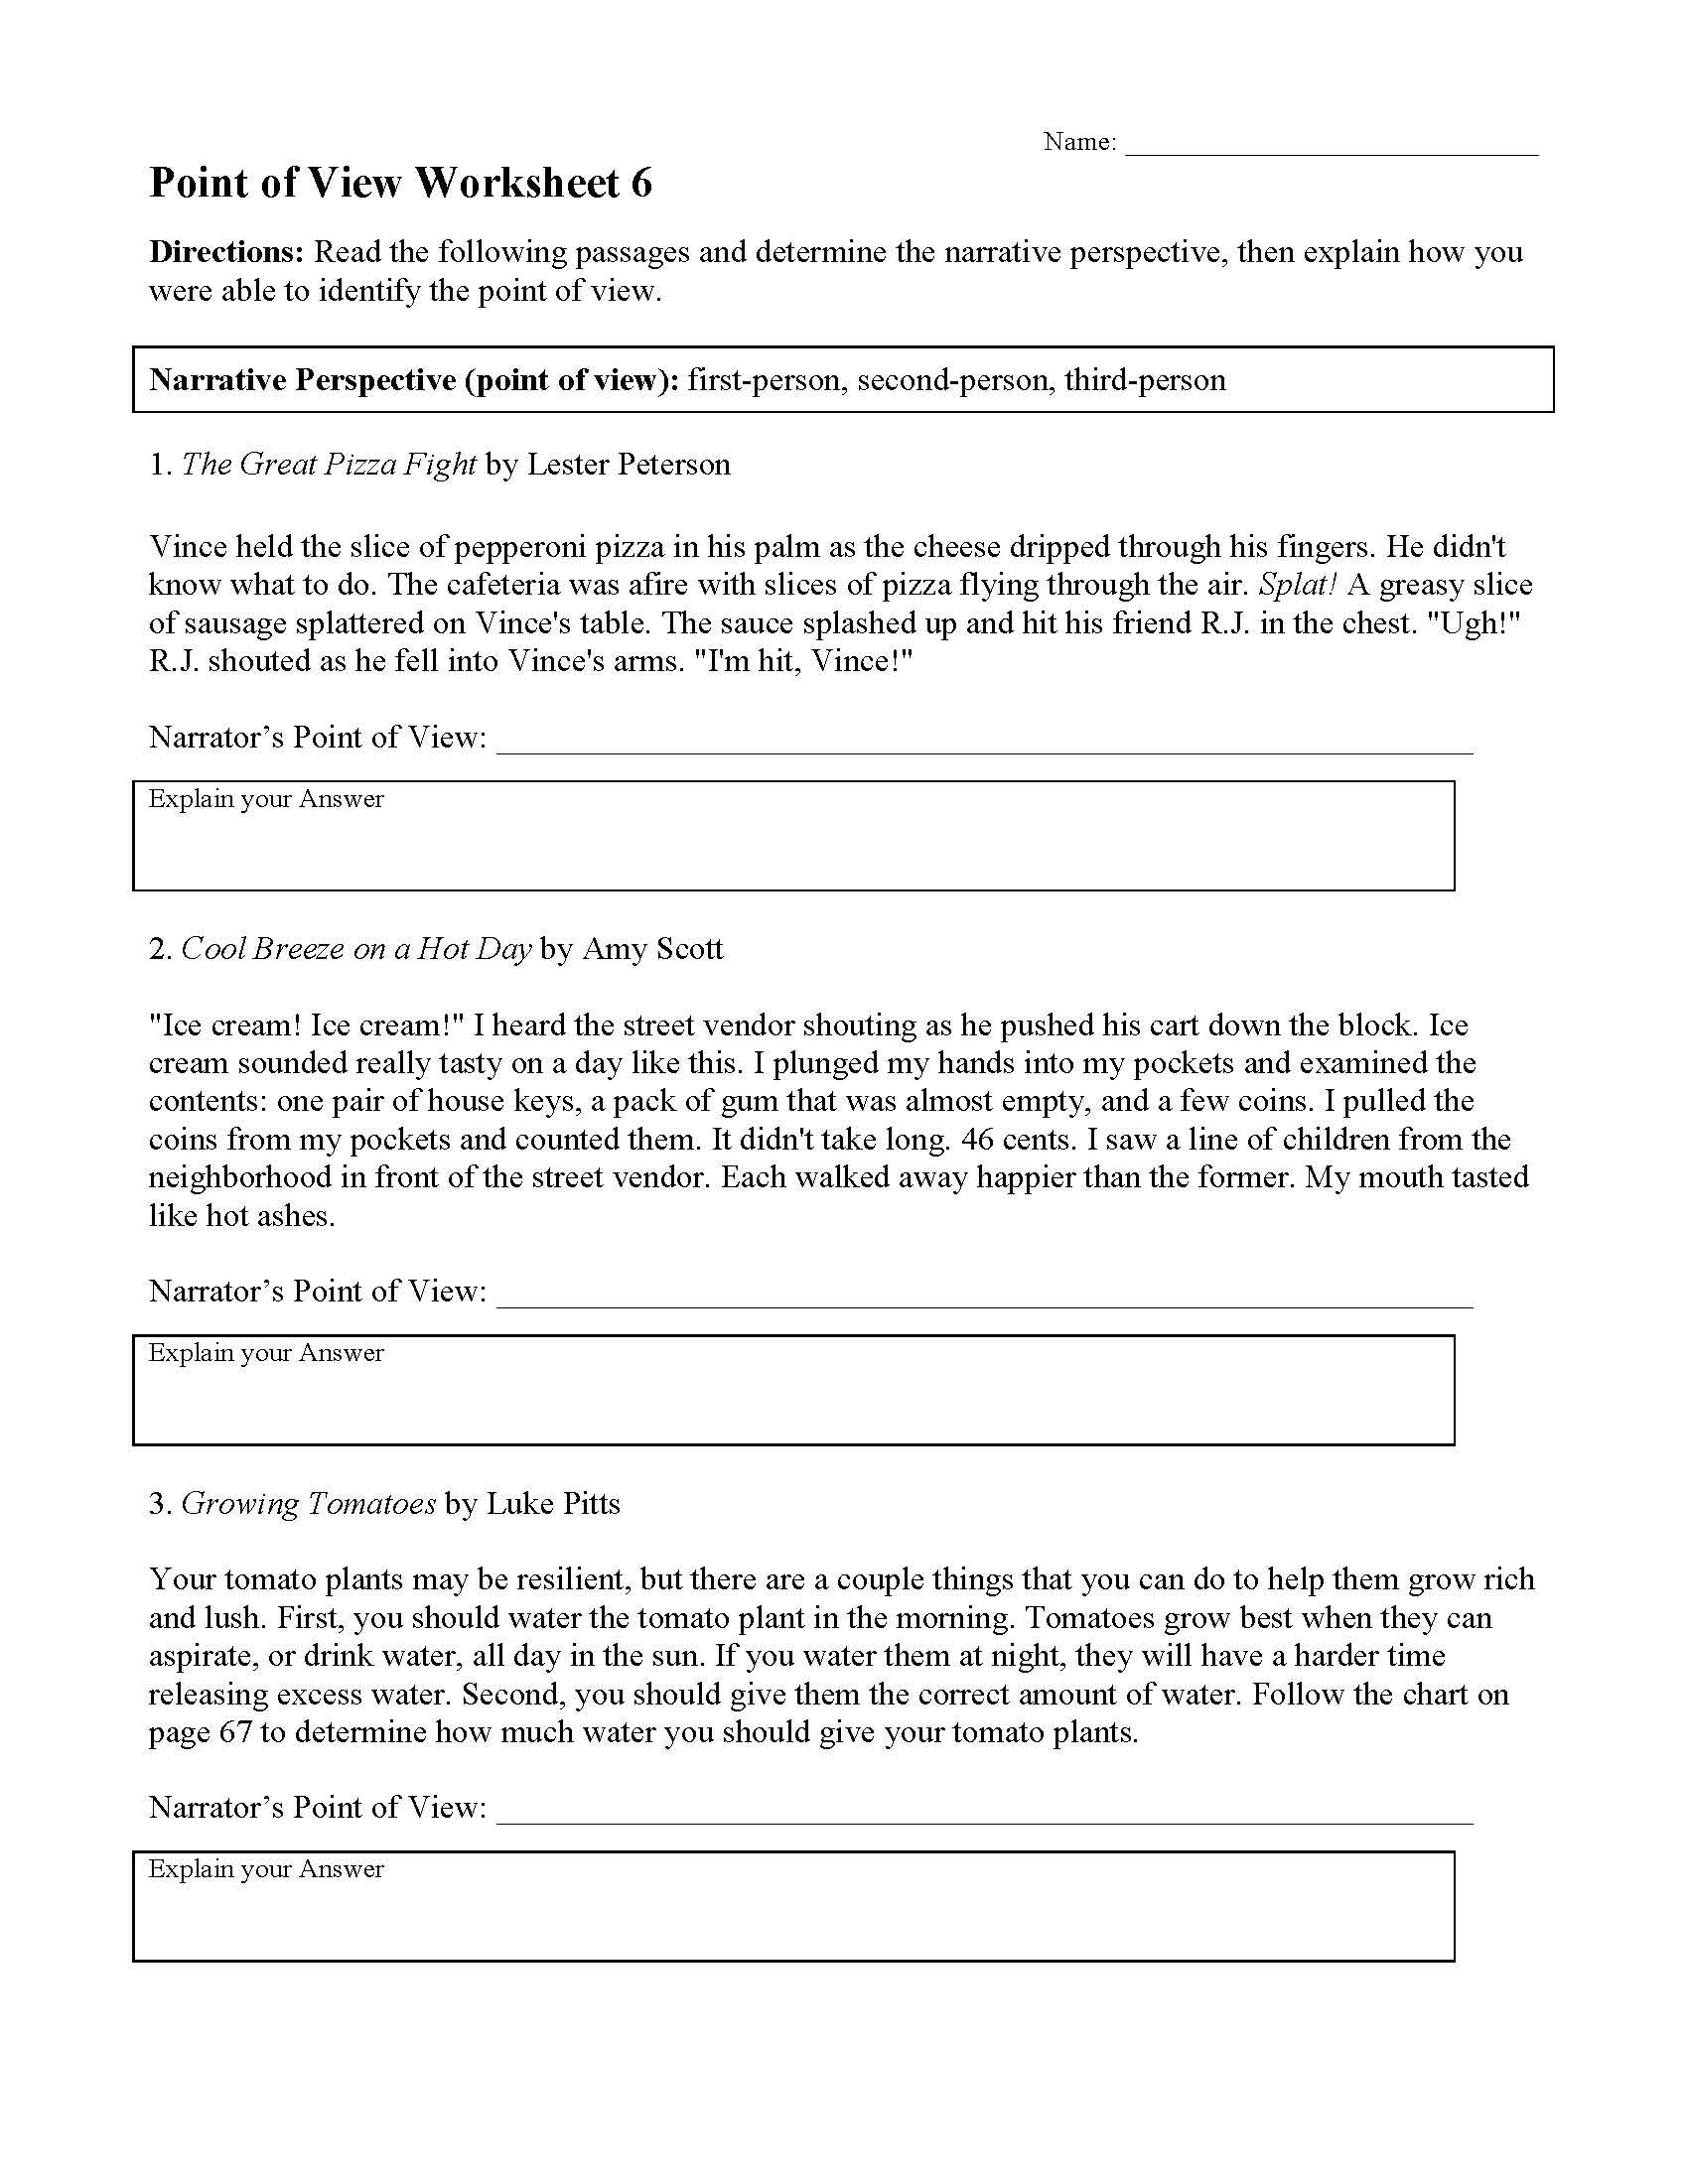 This is a preview image of Point of View Worksheet 6. Click on it to enlarge it or view the source file.